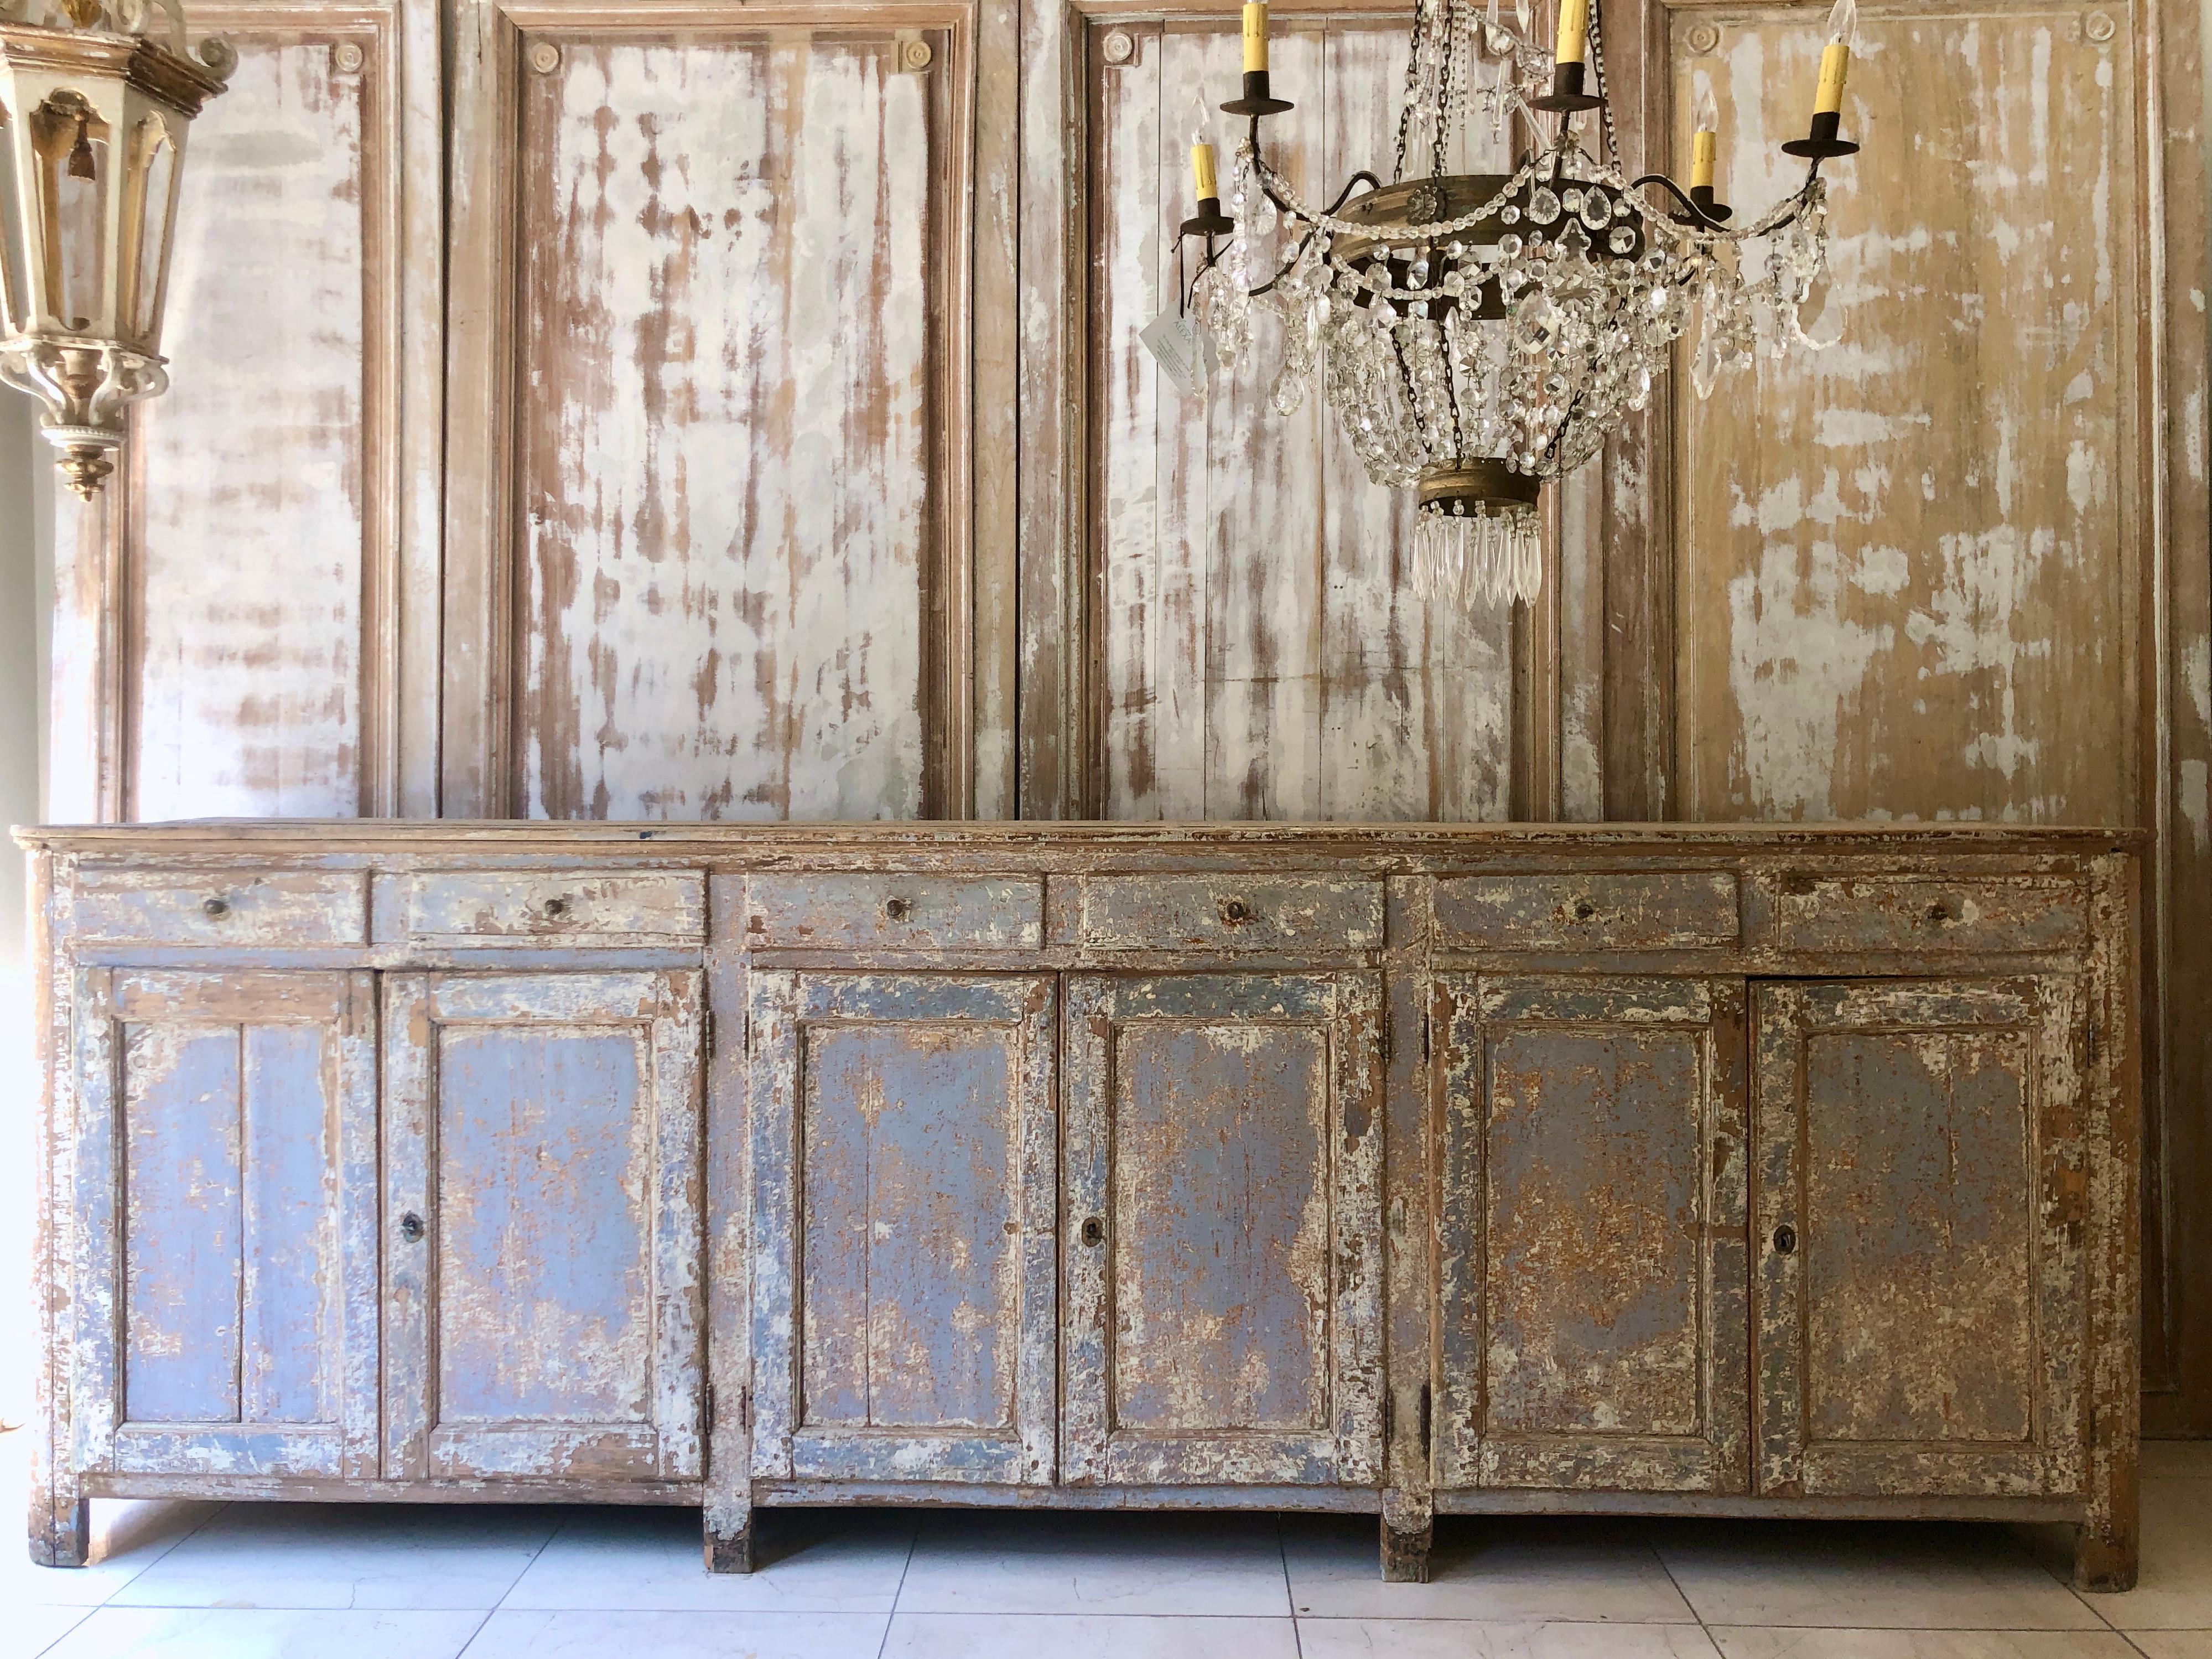 A long 18th century Swedish sideboard with six paneled doors and drawers in remnants of original with and blue paint.
    